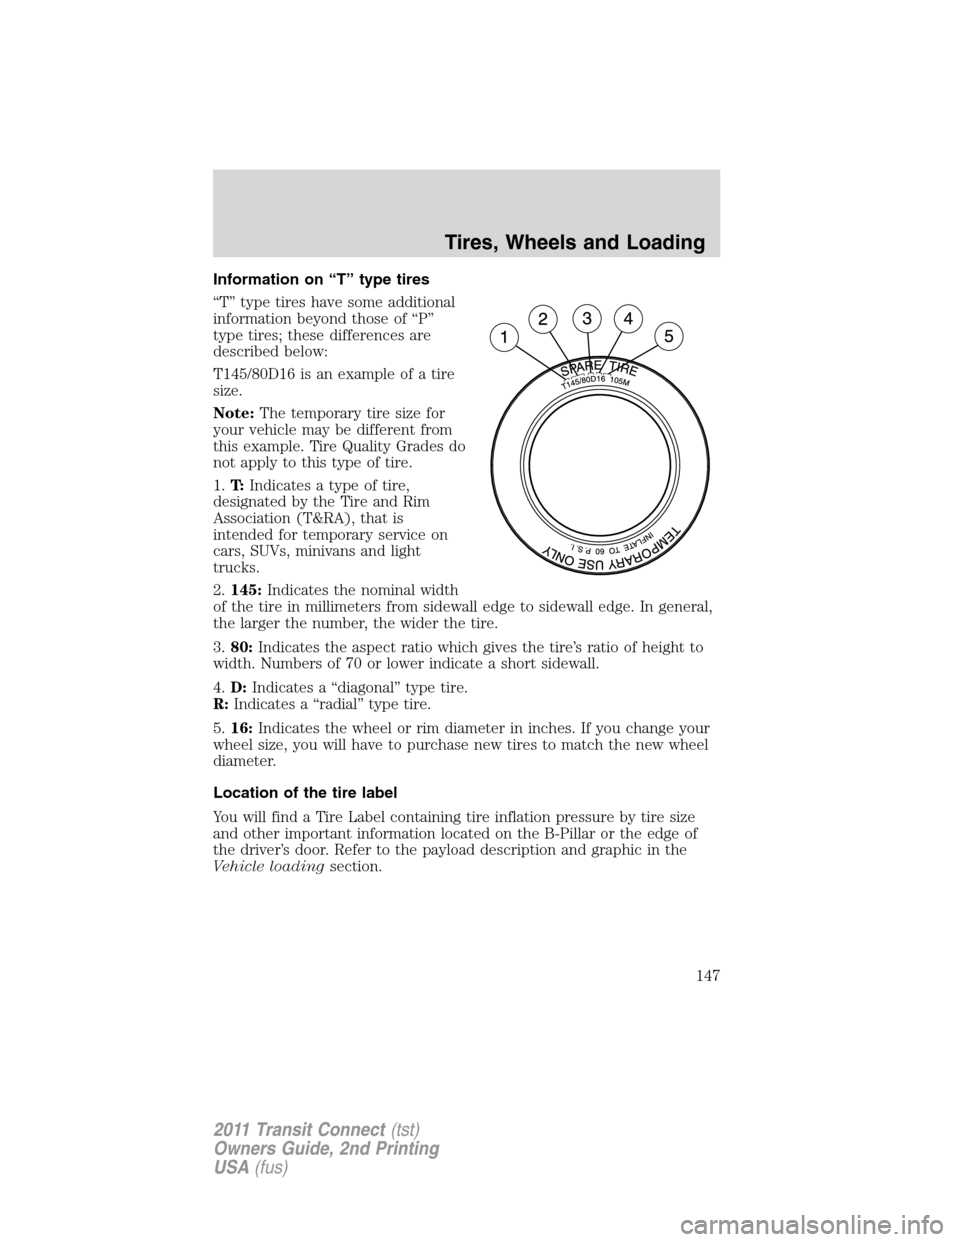 FORD TRANSIT CONNECT 2011 1.G Owners Manual Information on “T” type tires
“T” type tires have some additional
information beyond those of “P”
type tires; these differences are
described below:
T145/80D16 is an example of a tire
size